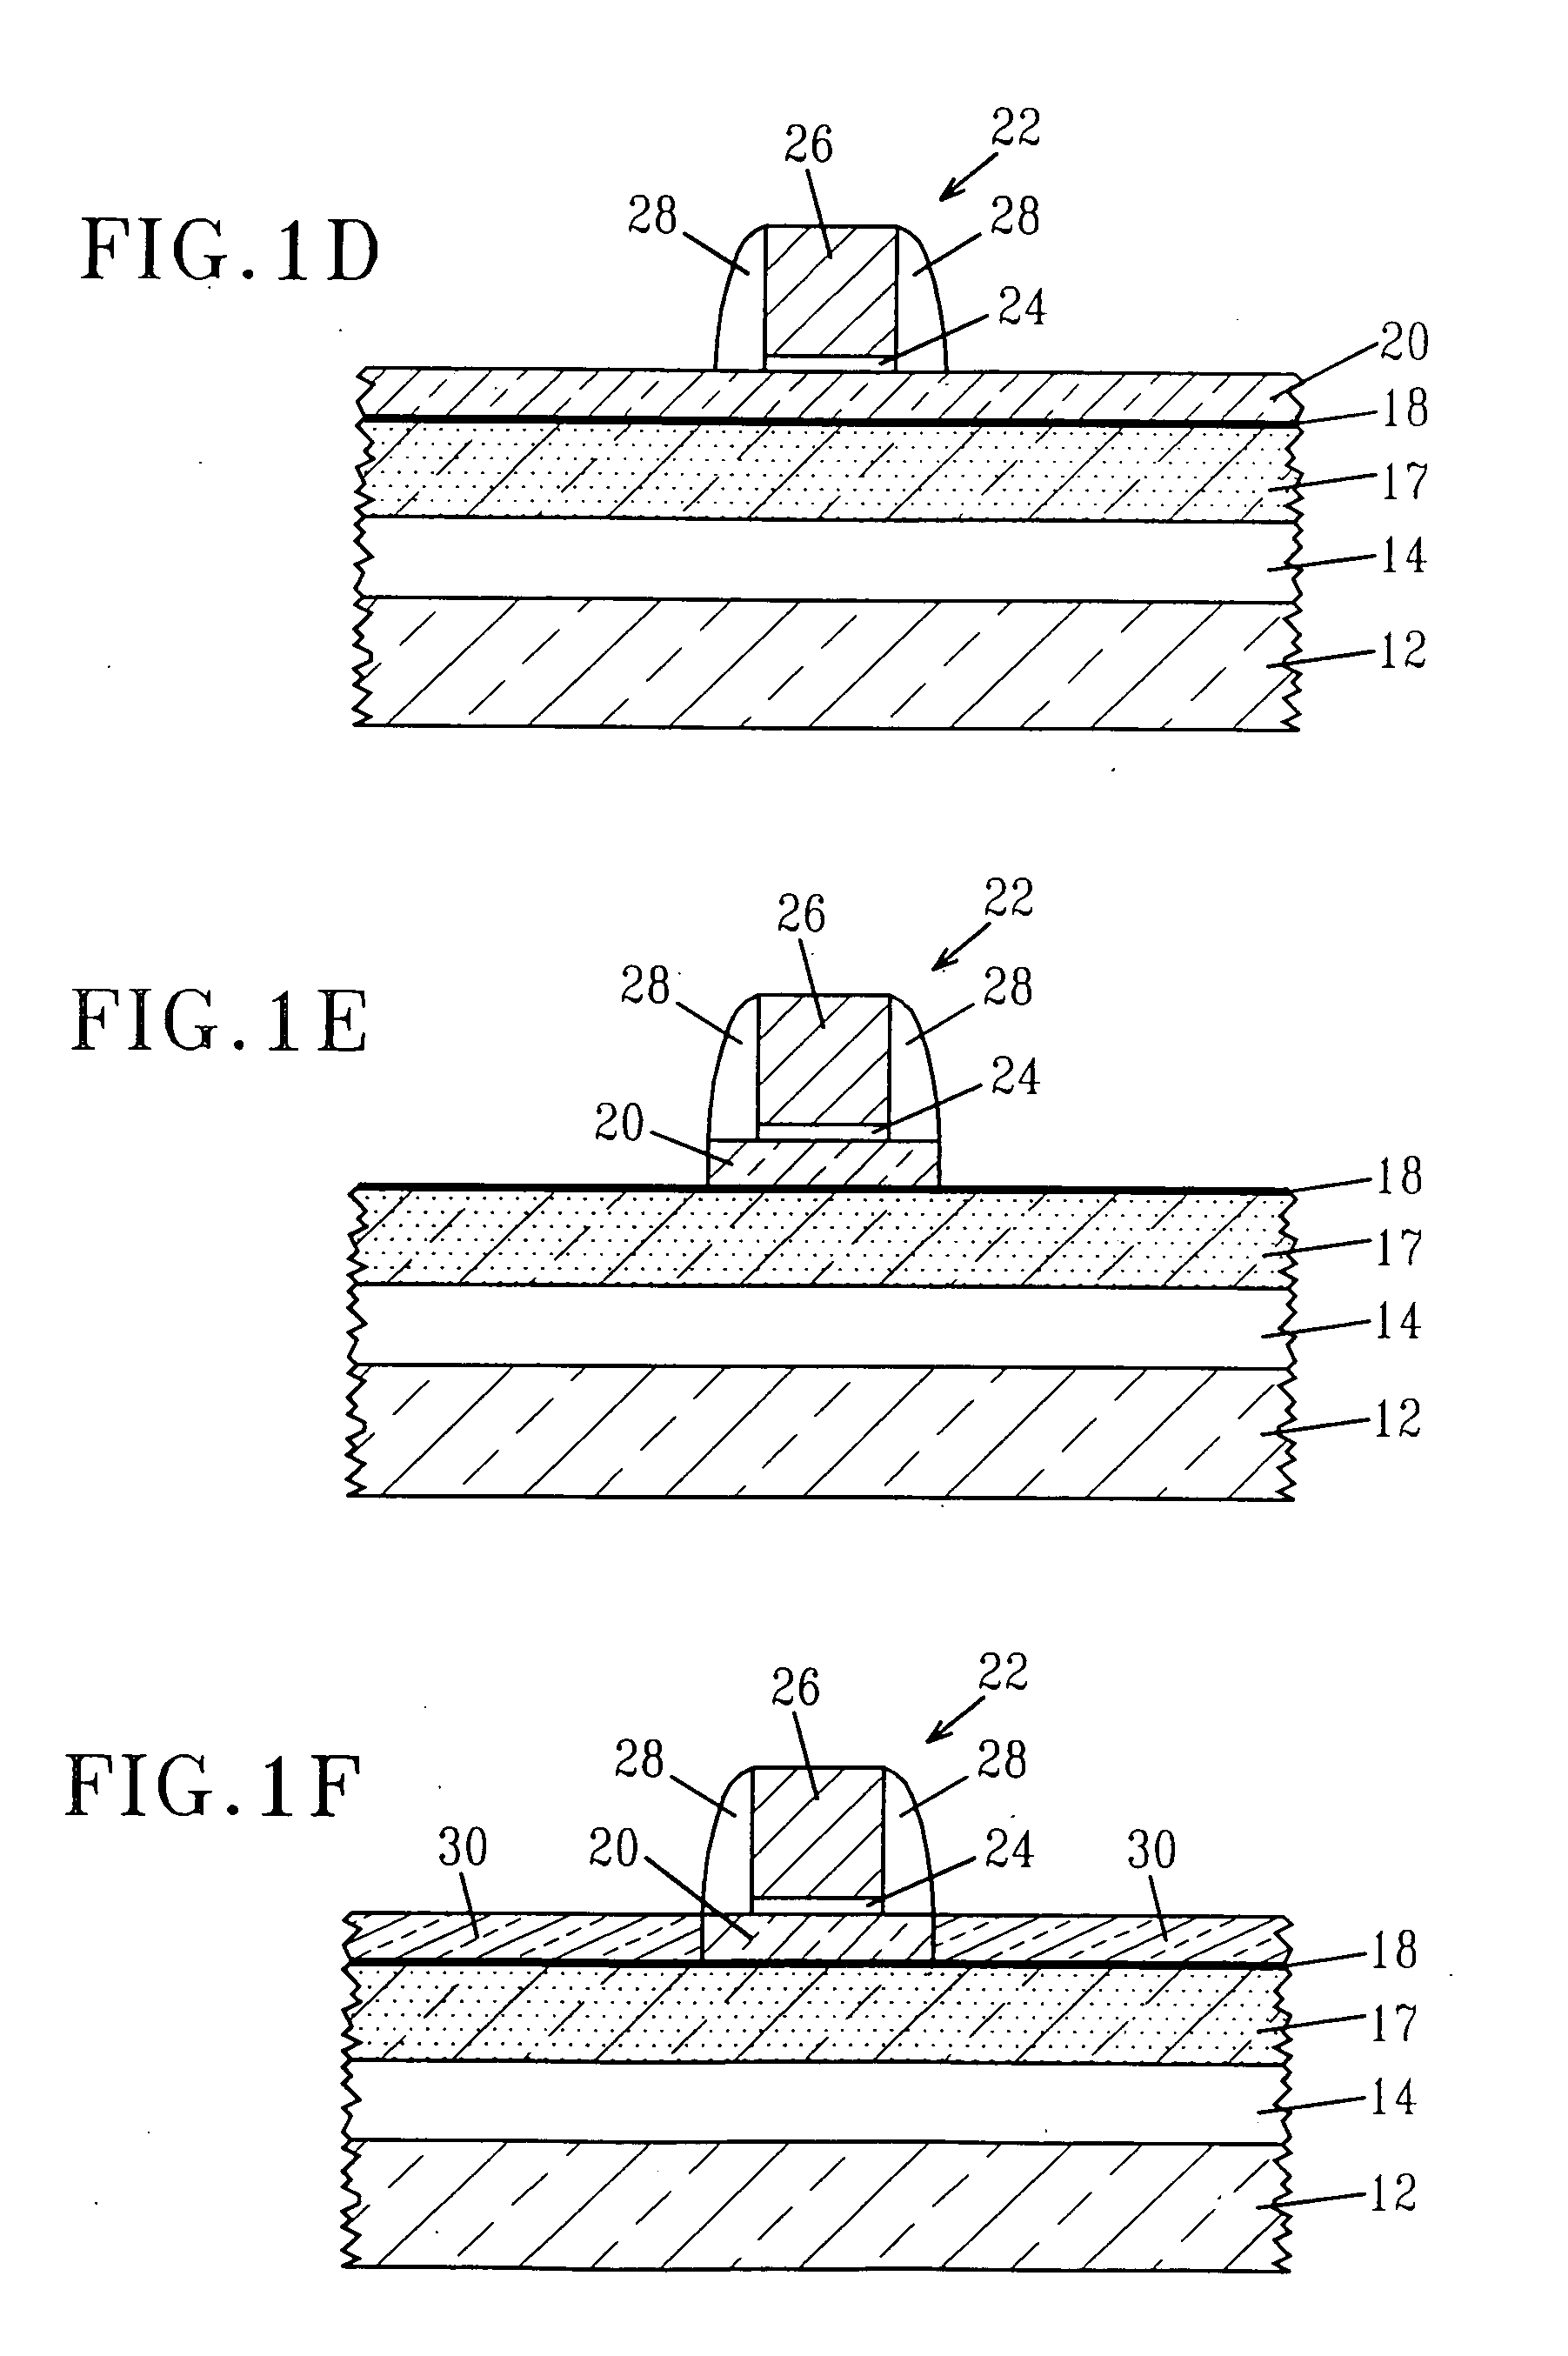 Manufacturable recessed strained rsd structure and process for advanced CMOS